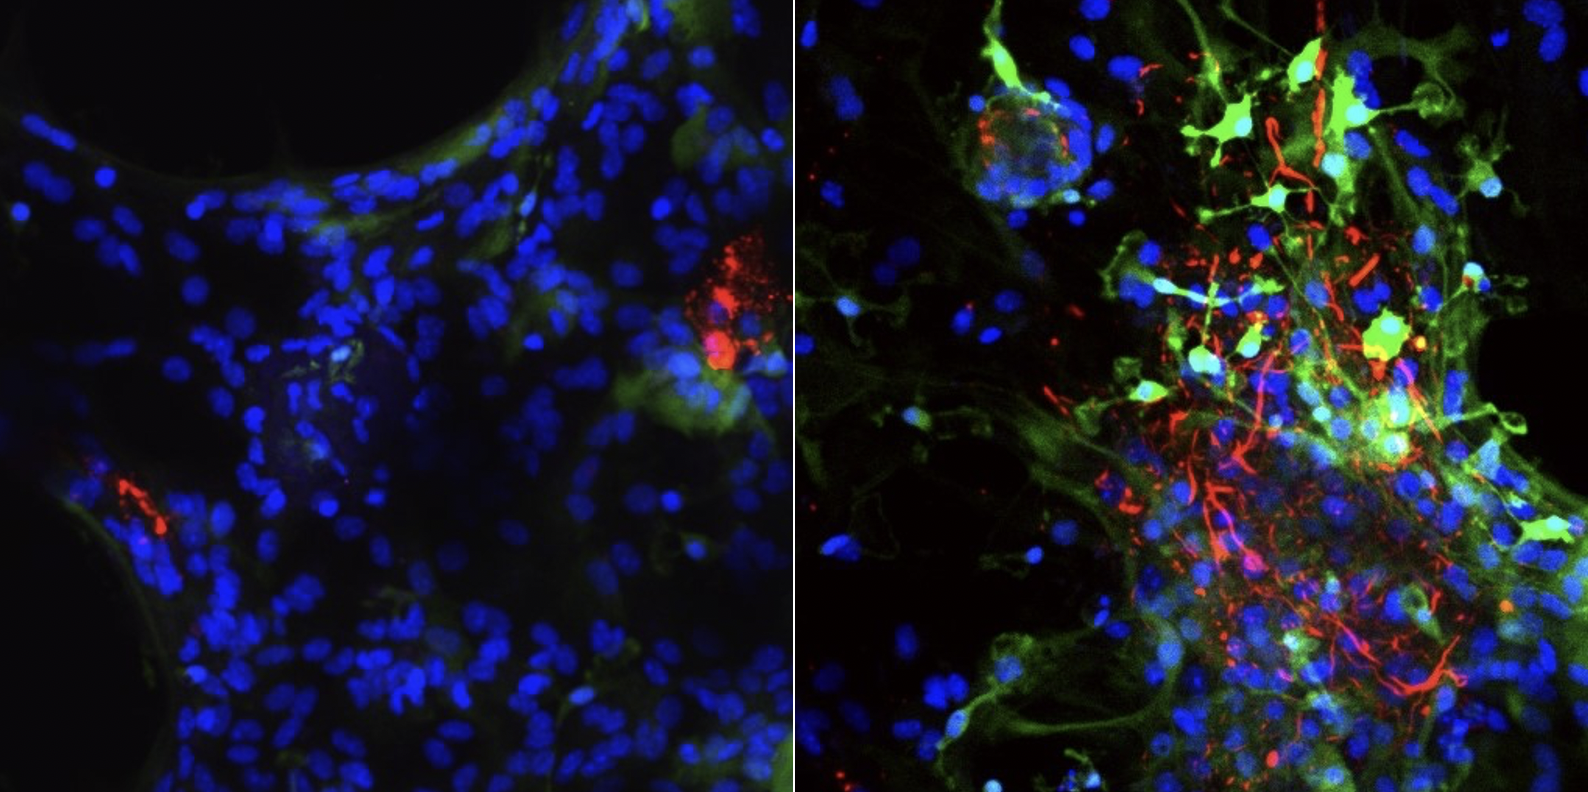 Two panels of cells affected by Parkinson's disease with fluorescent labels in shades of red, green, and blue